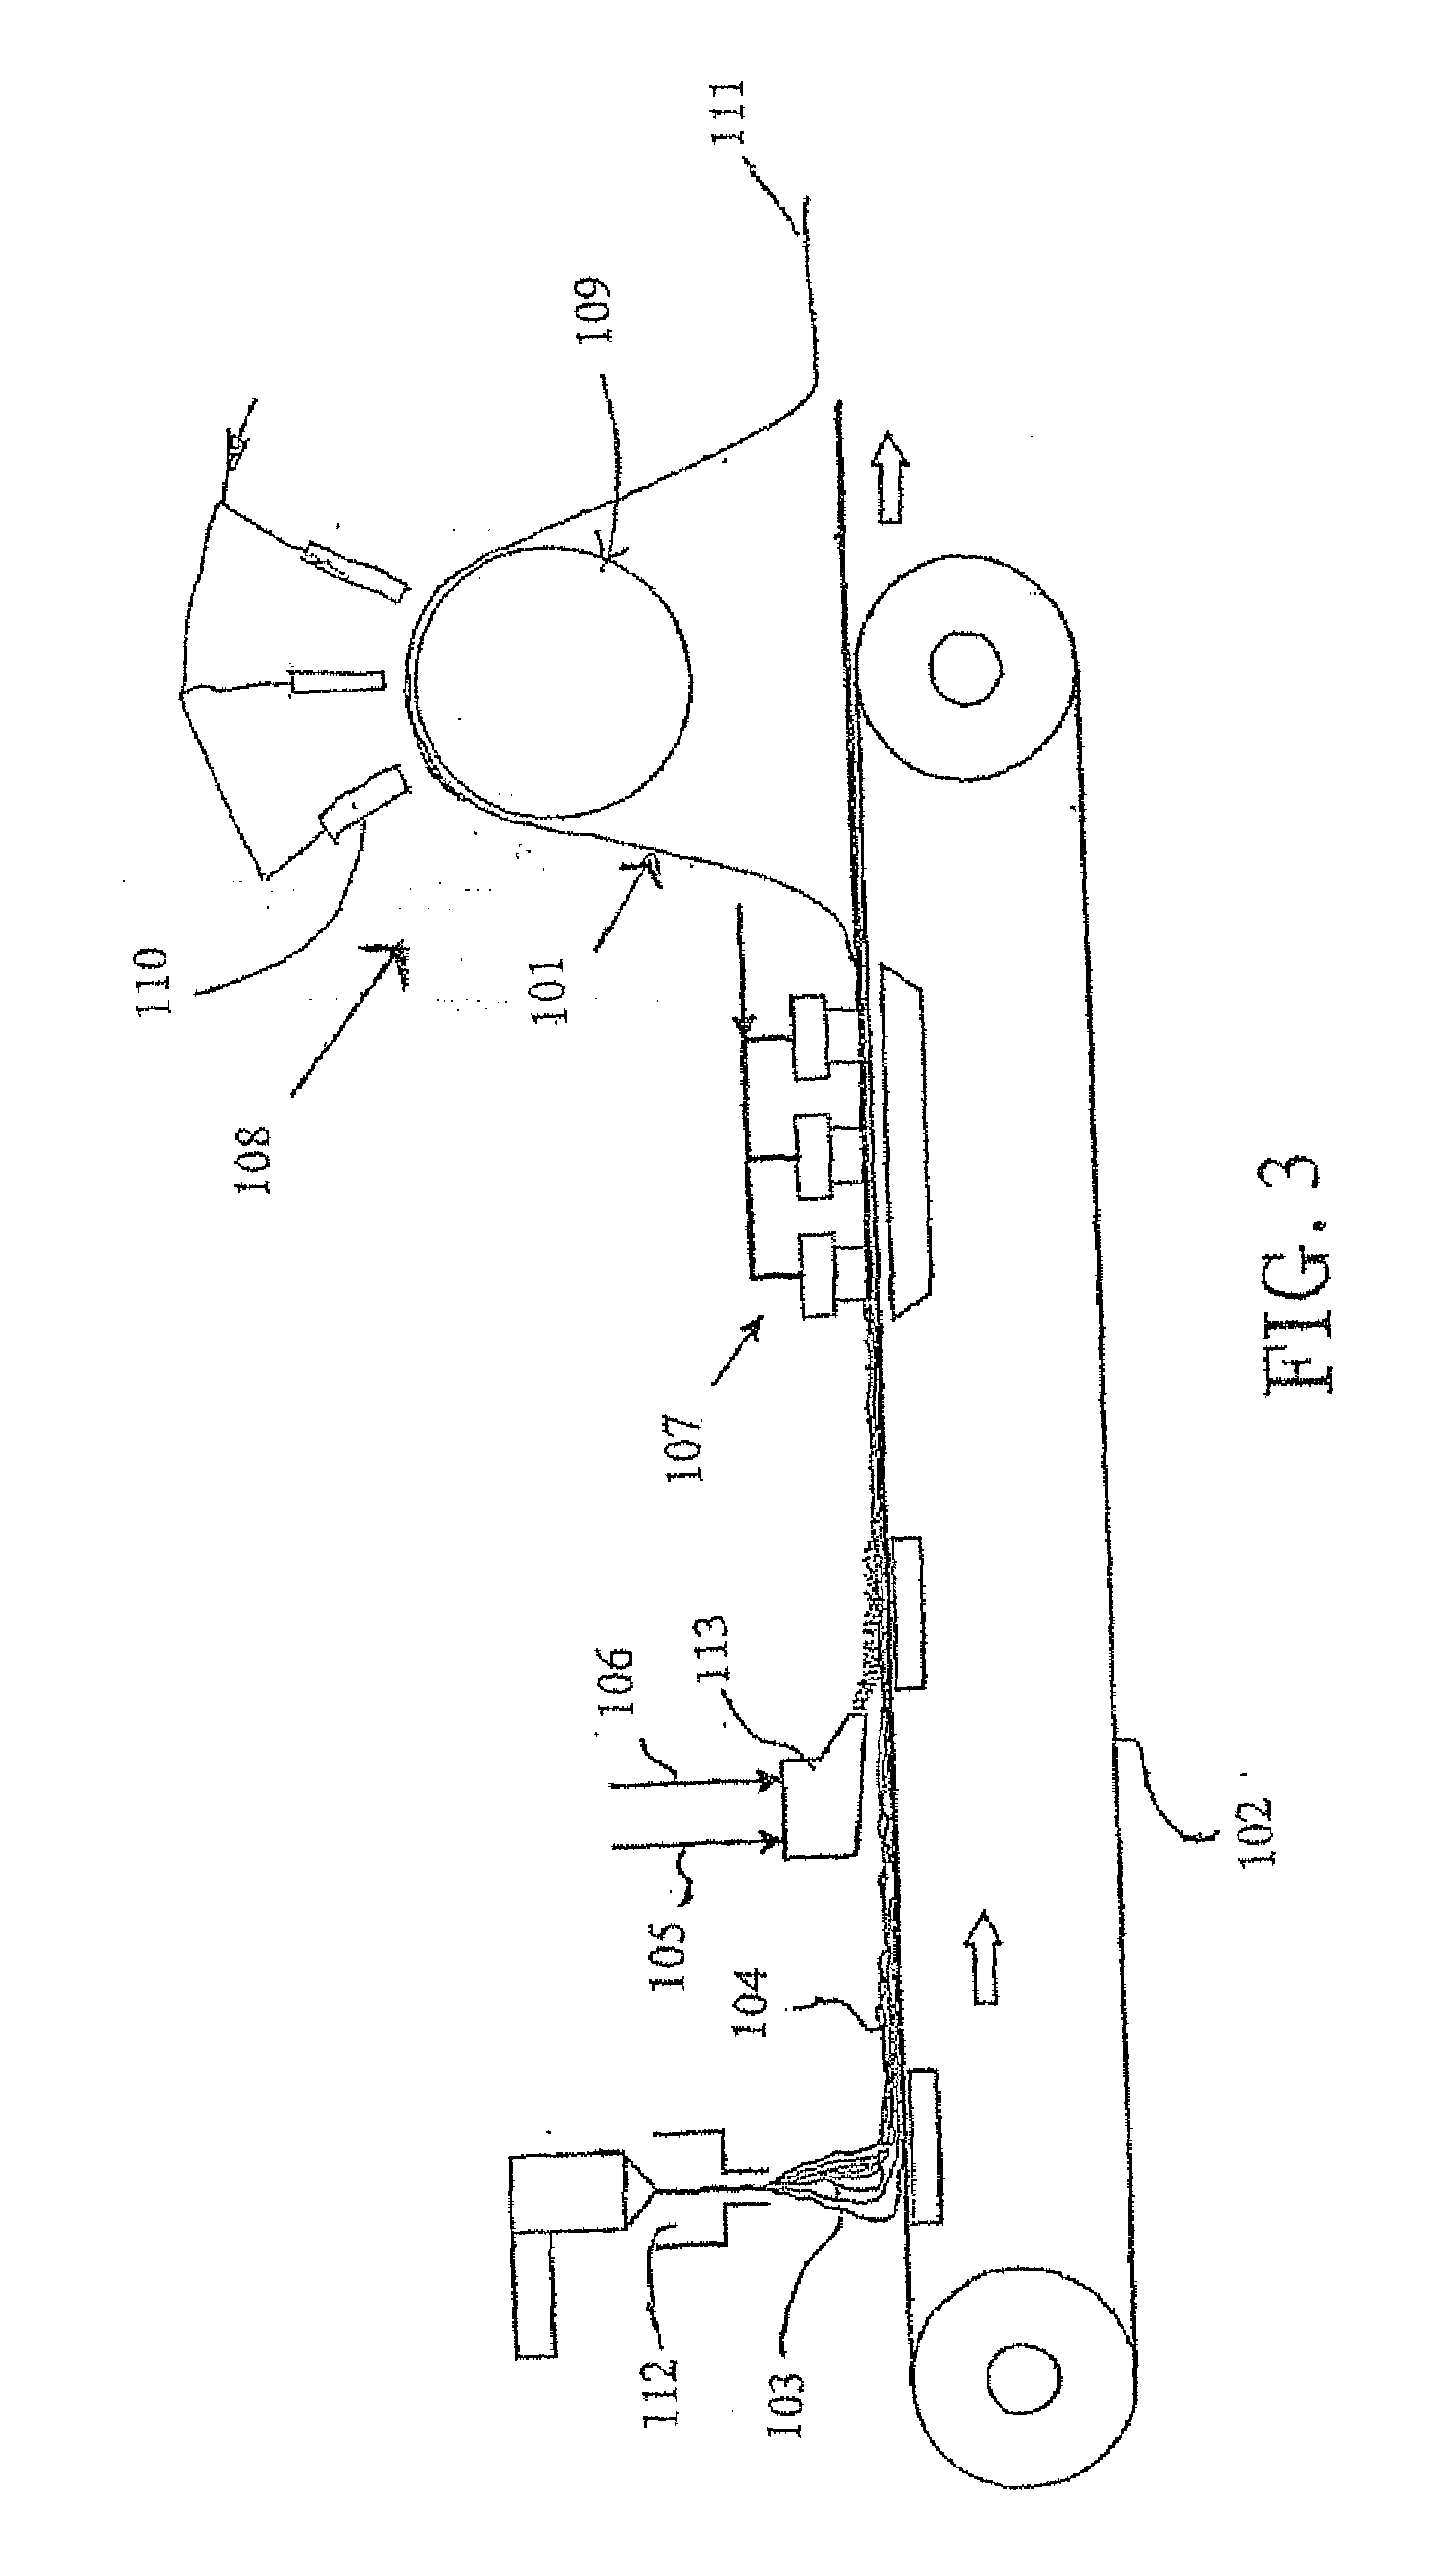 Nonwoven Material and a Method for Producing Nonwoven Material